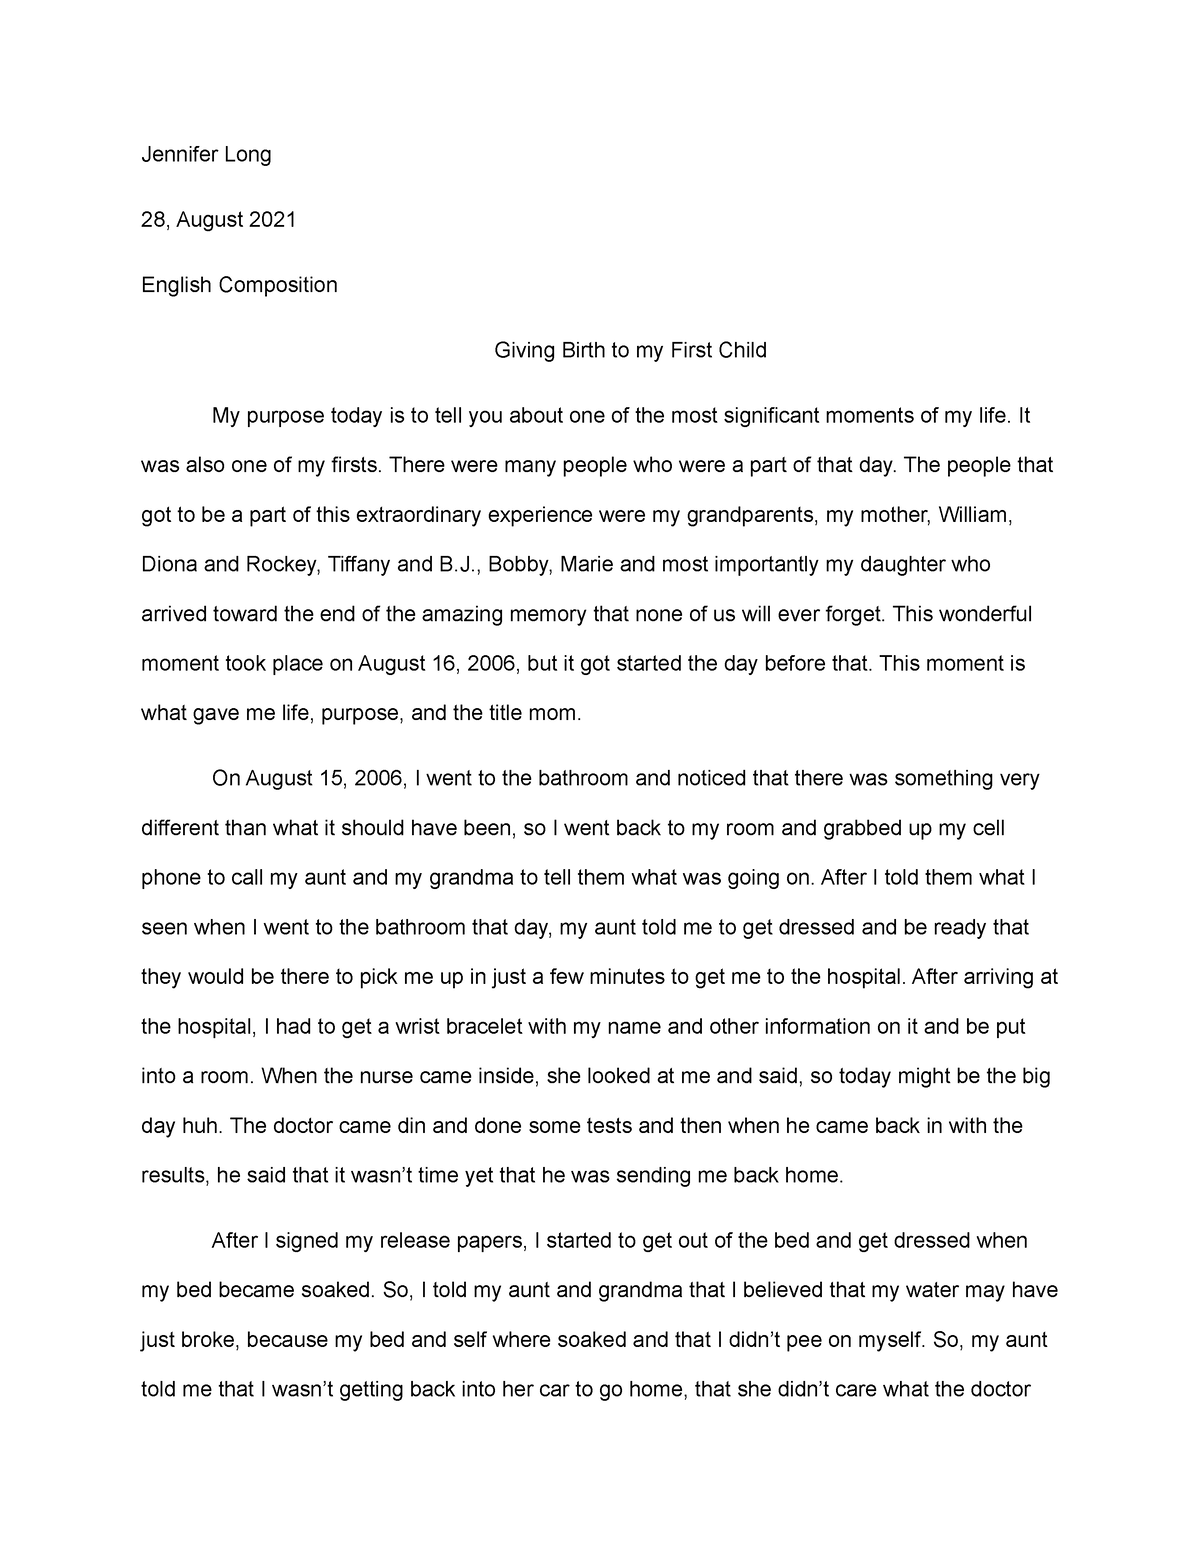 essay about giving birth